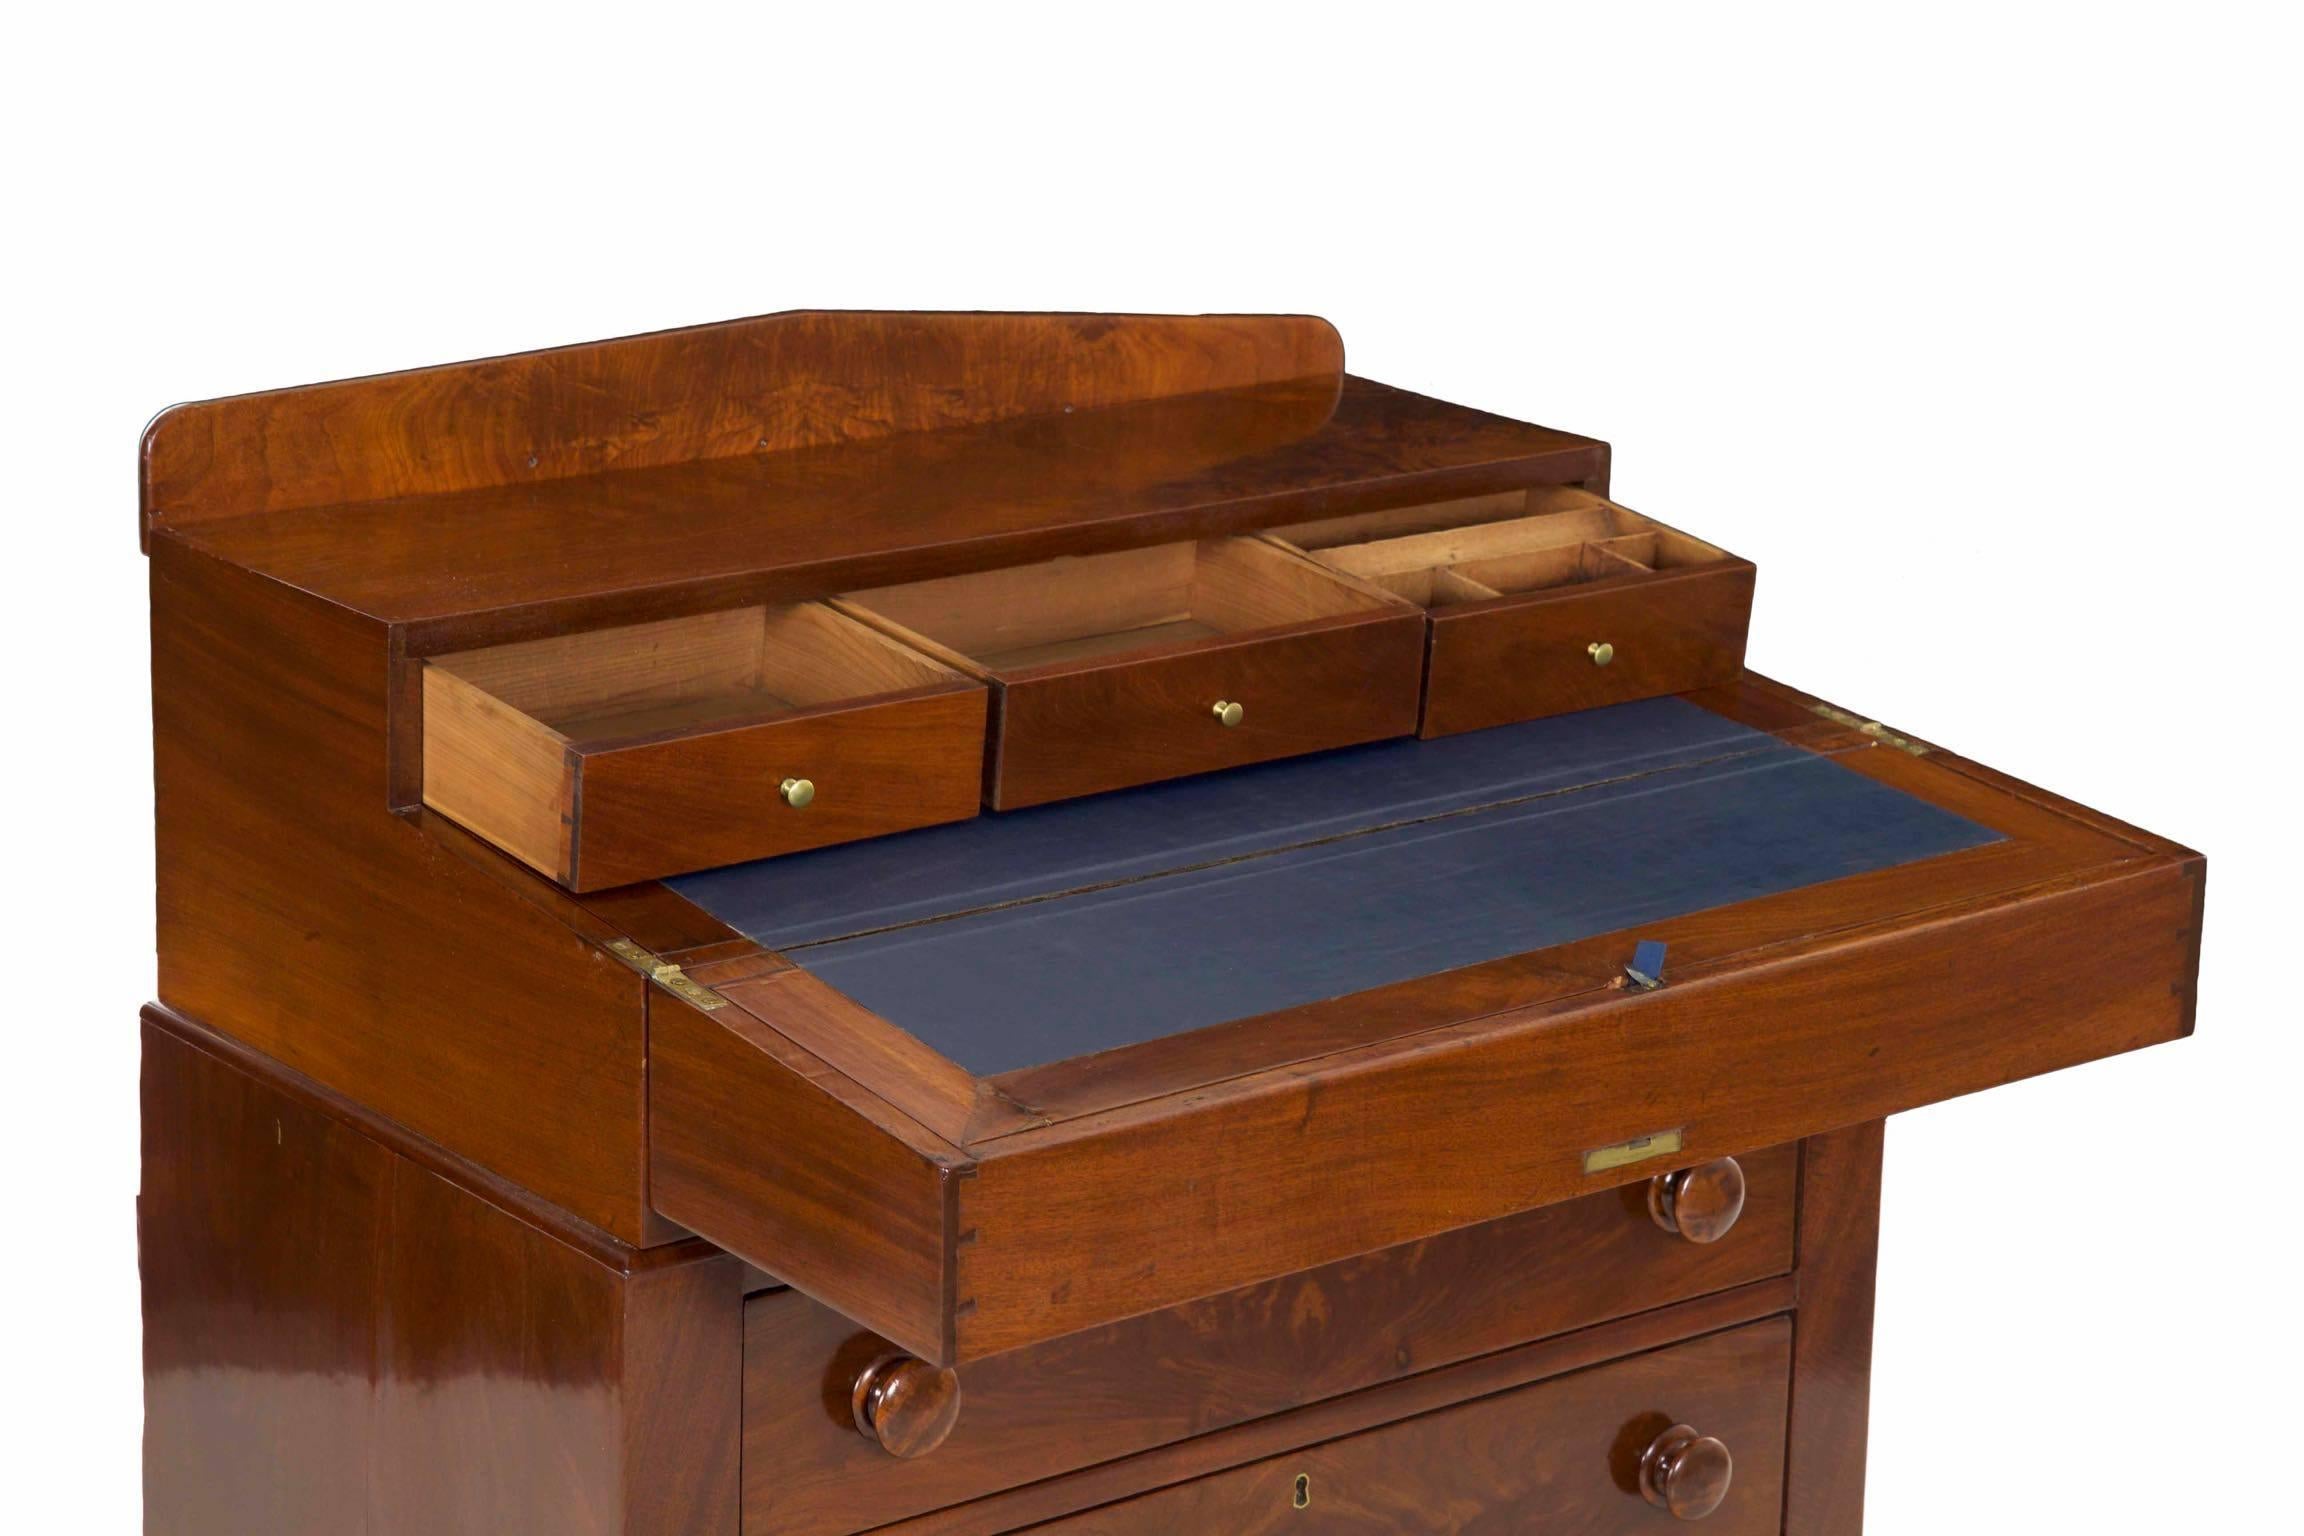 American Classical American Late Classical Crotch-Mahogany Writing Desk over Chest c. 1850-70